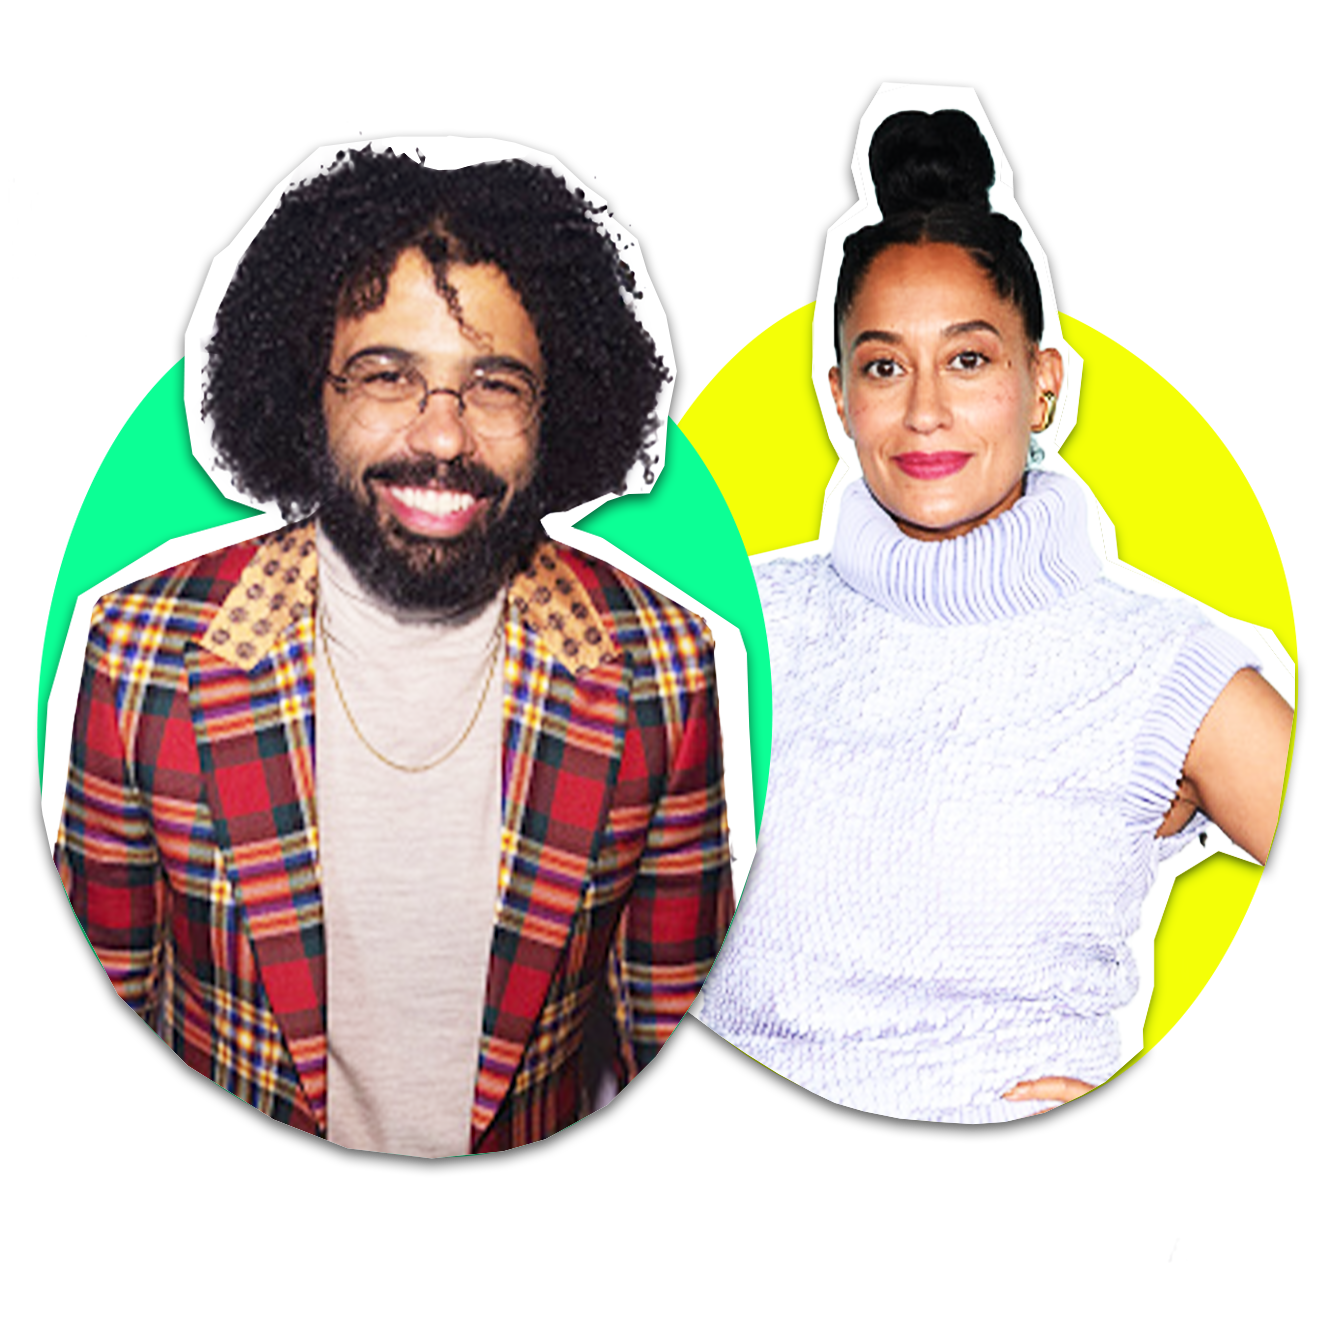 How Tracee Ellis Ross and Daveed Diggs Bonded as Members of “the CurlyHair Family”